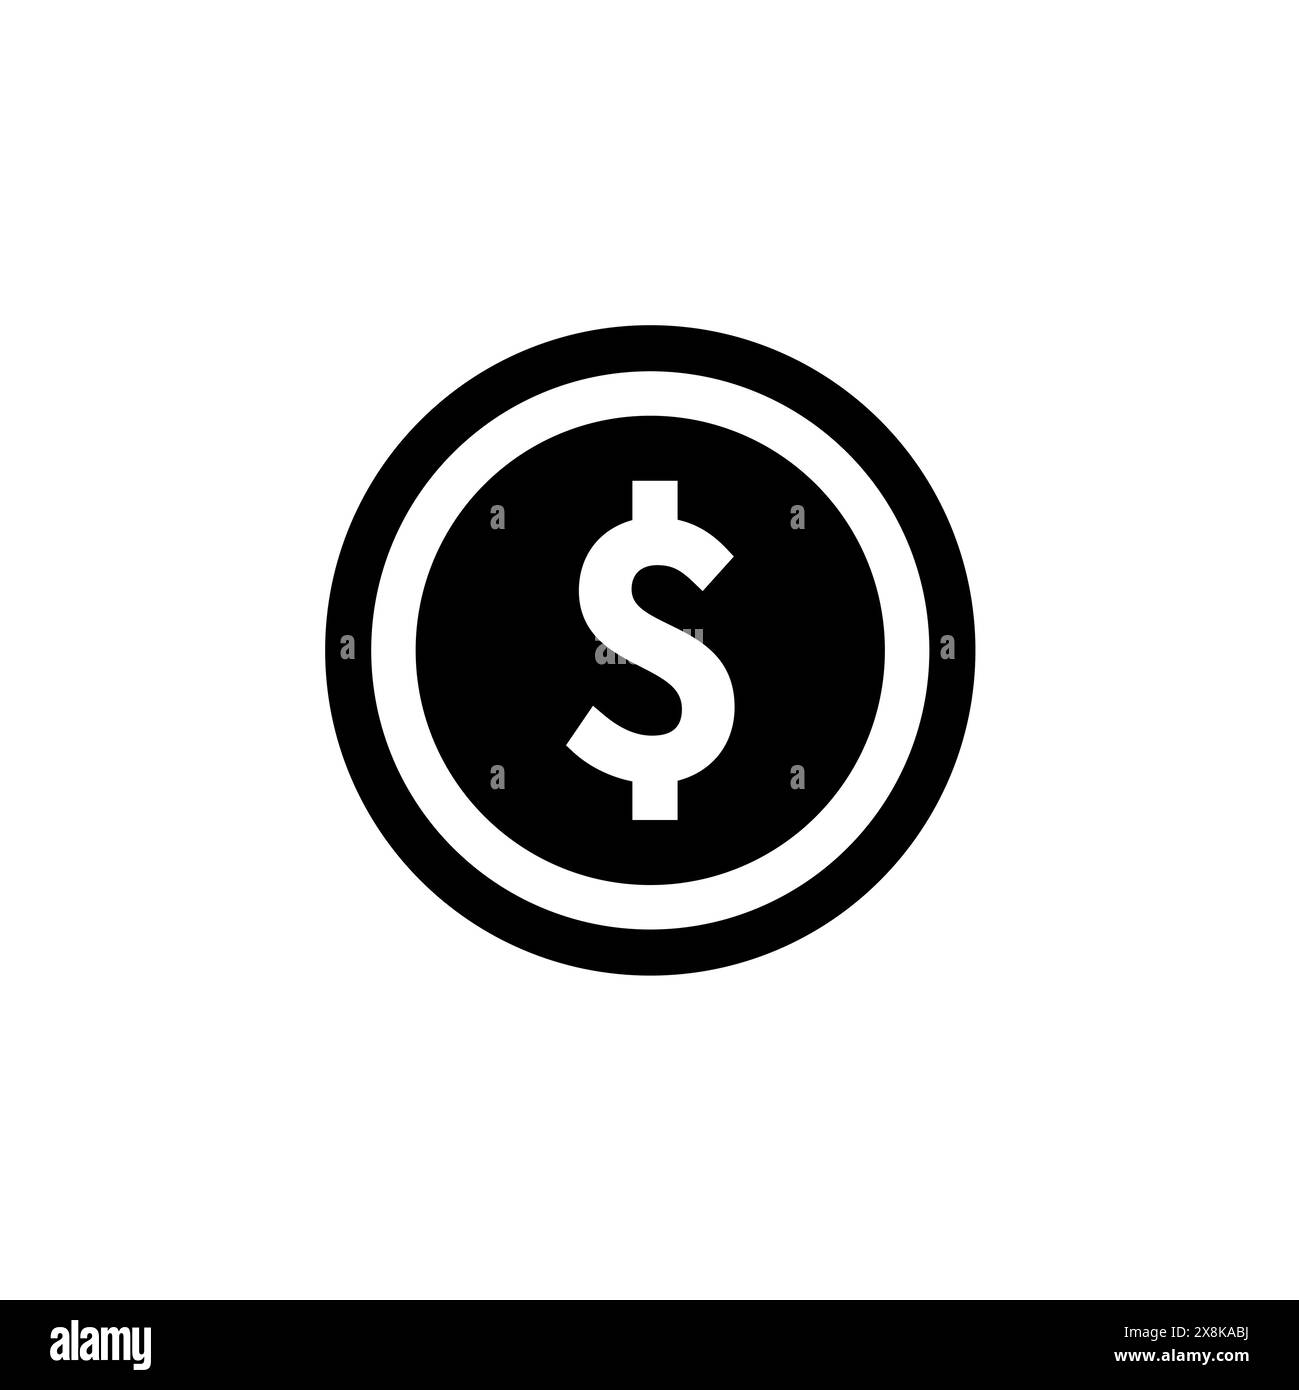 Dollar Coin Solid Flat Vector Icon Isolated on White Background. Stock Vector